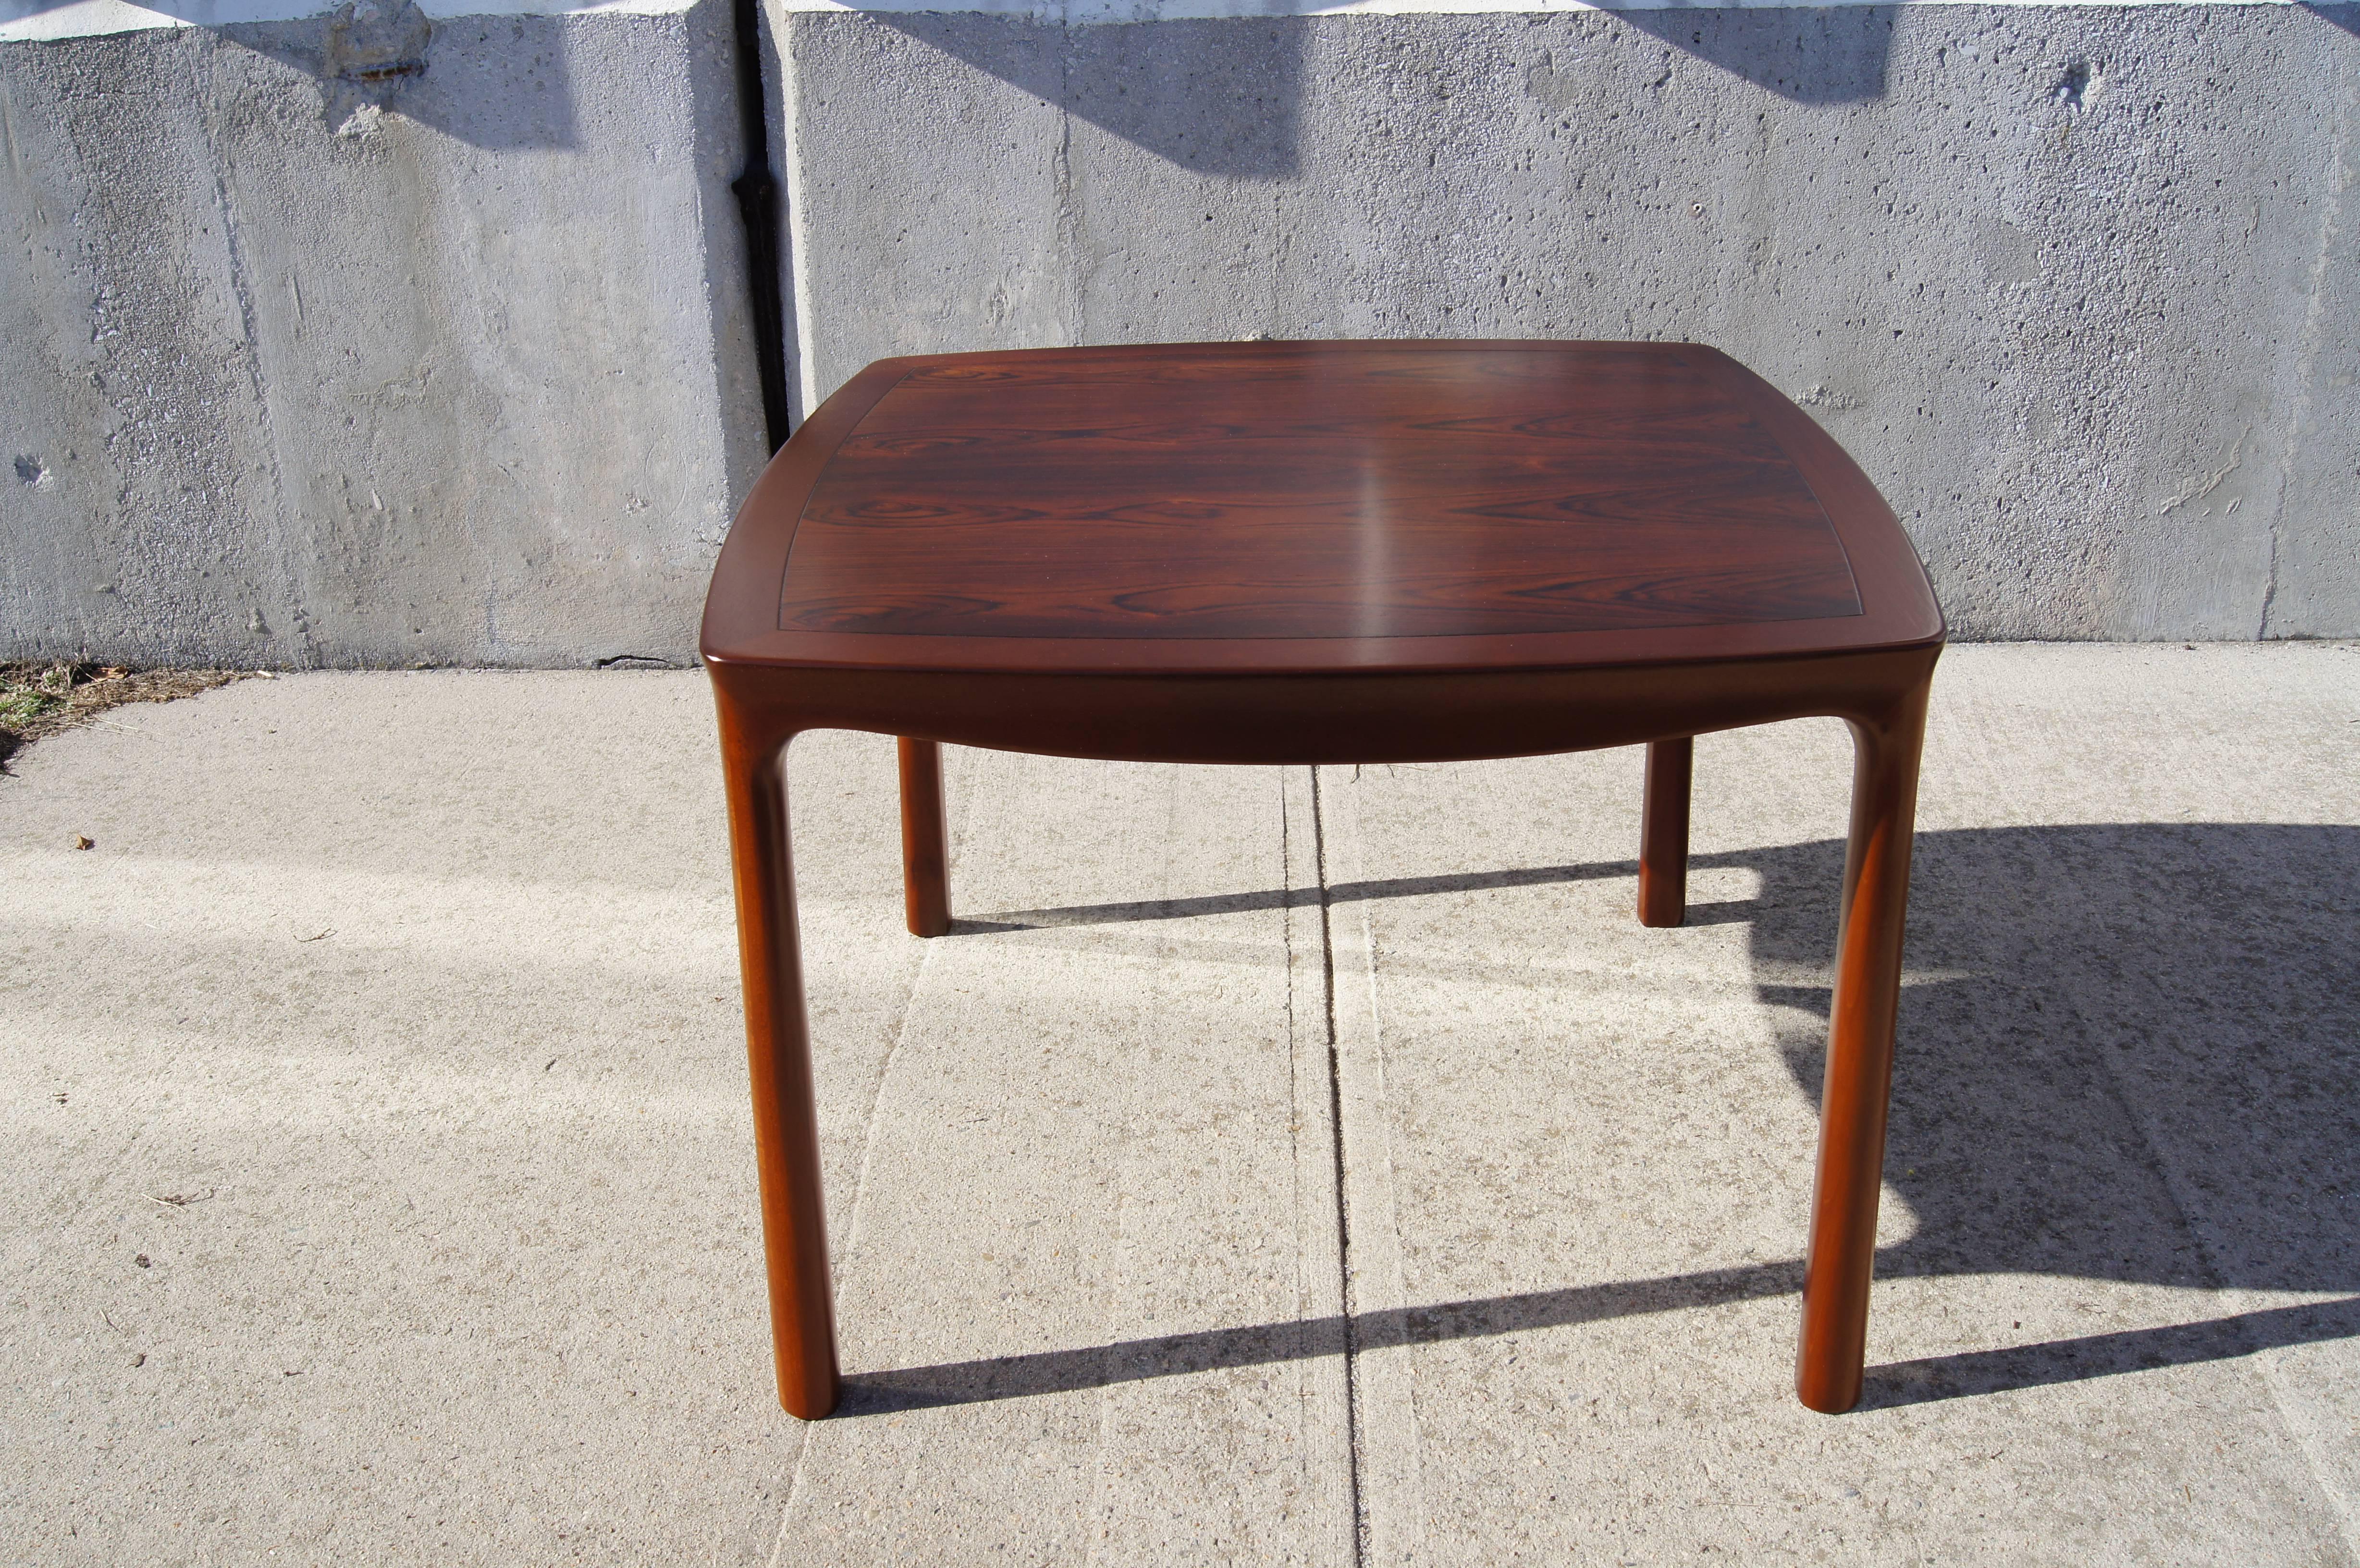 Designed by Edward Wormley for Dunbar in the late 1950s, this lovely square side table sets a deeply grained rosewood top into a mahogany frame with curved edges and gracefully shaped legs.

Dunbar label underneath.